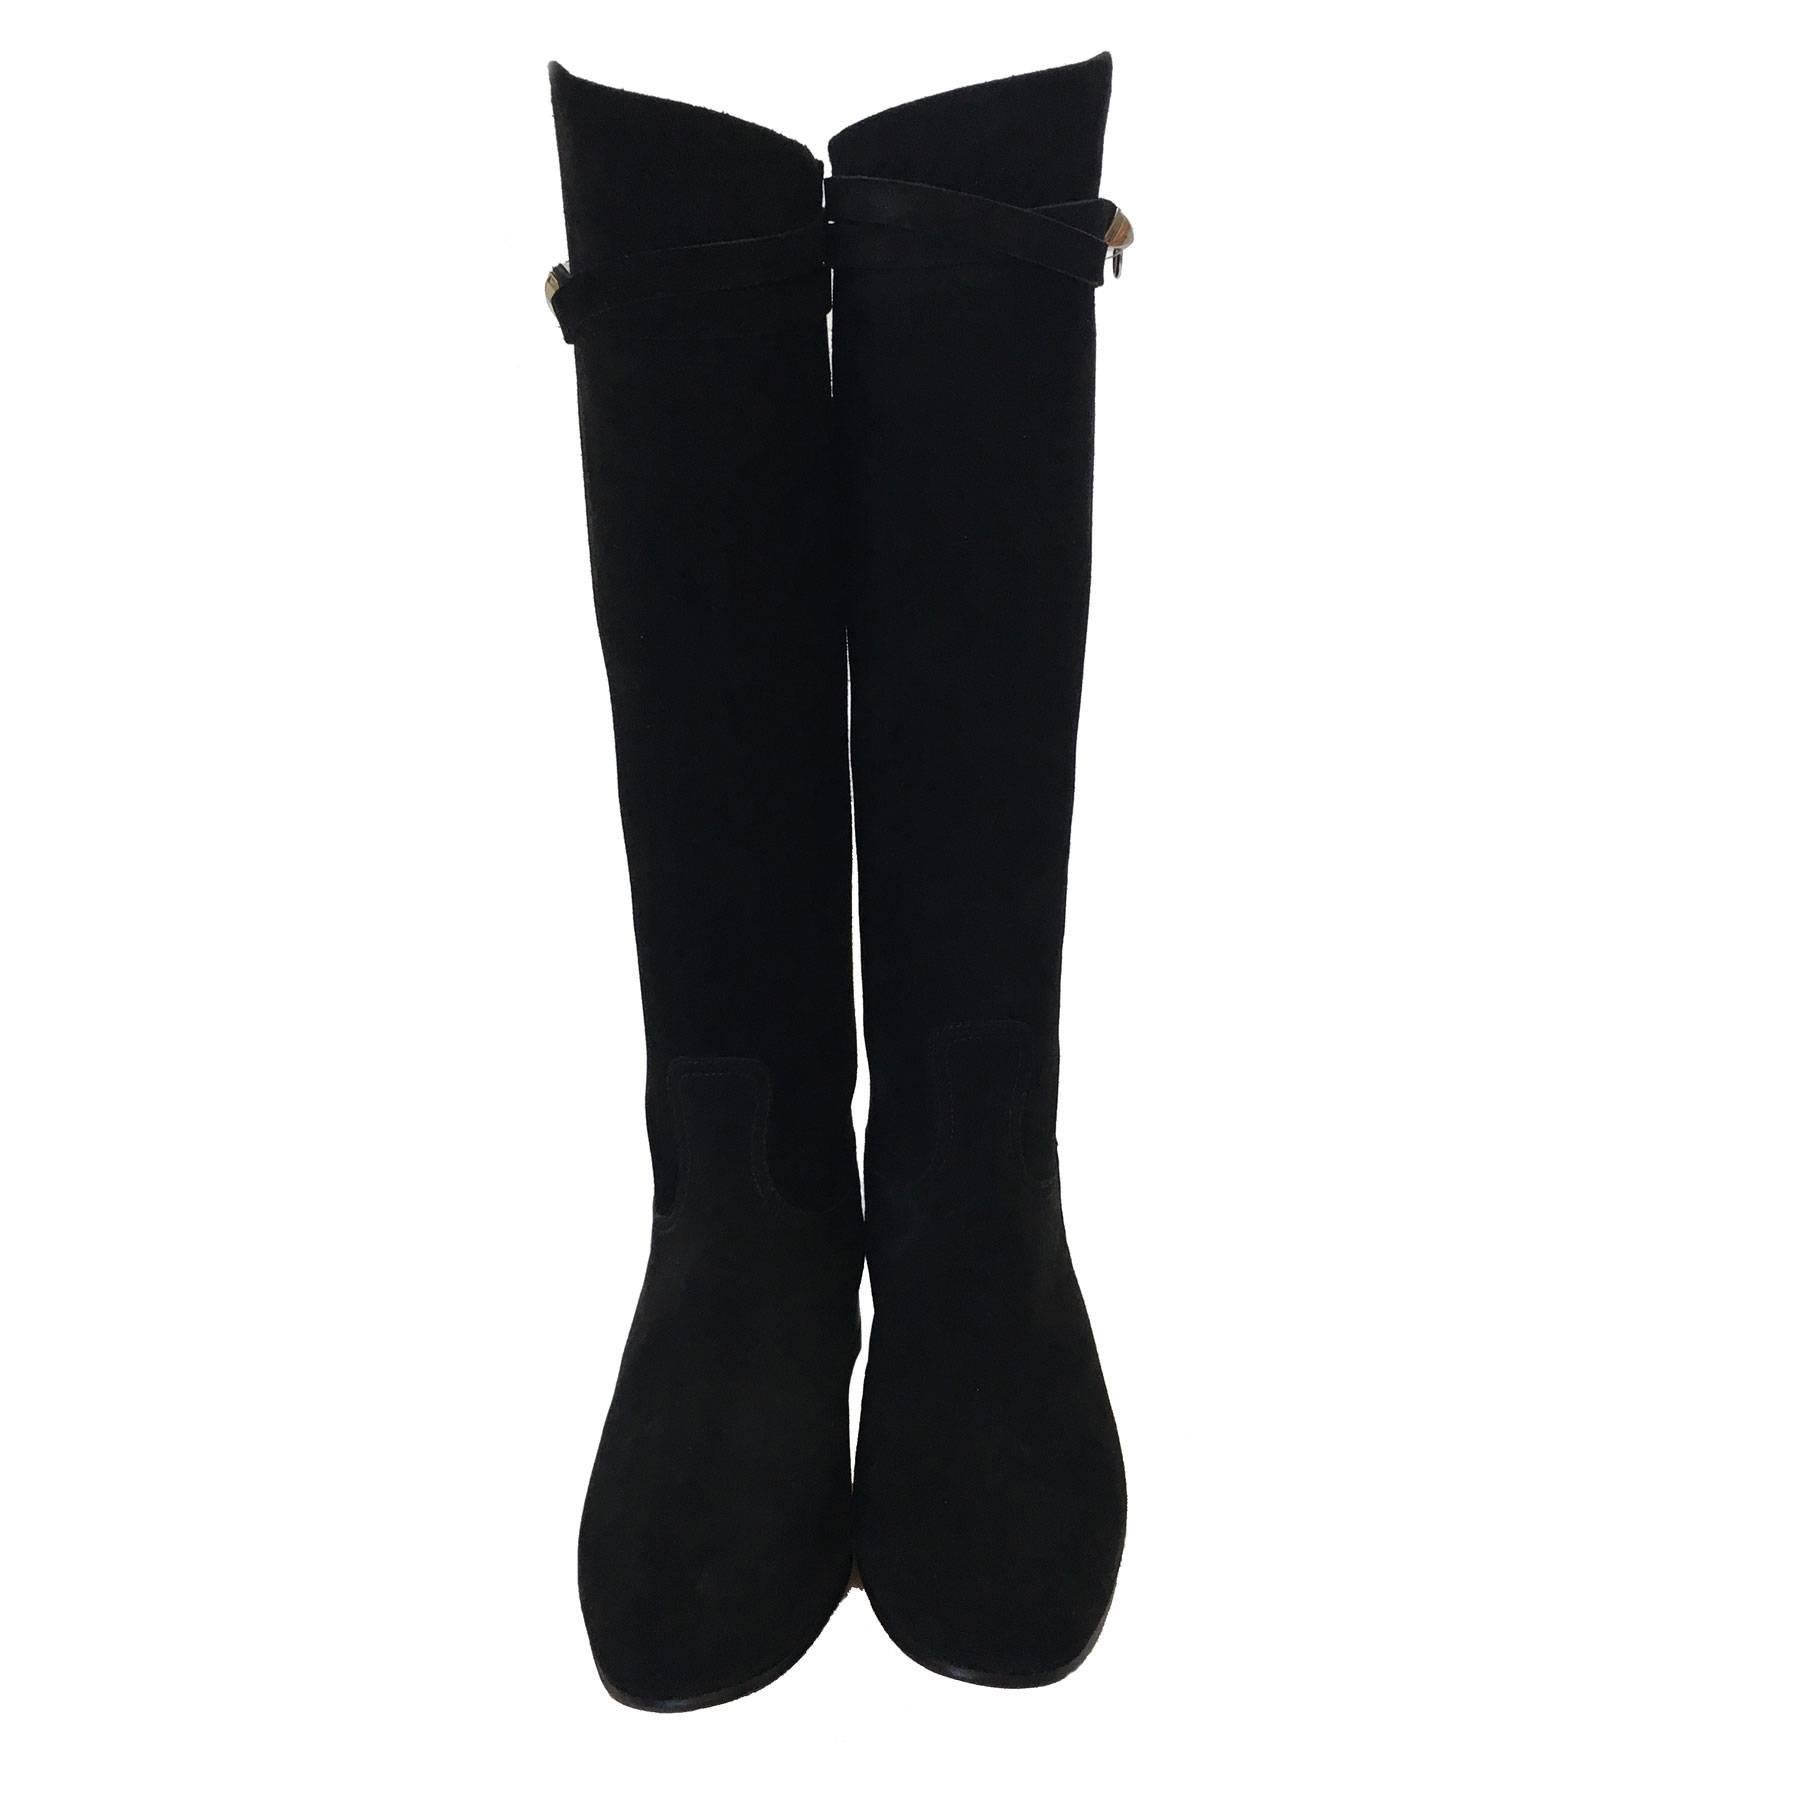 HERMES Riding Boots in Black Suede Size 36.5EU 1